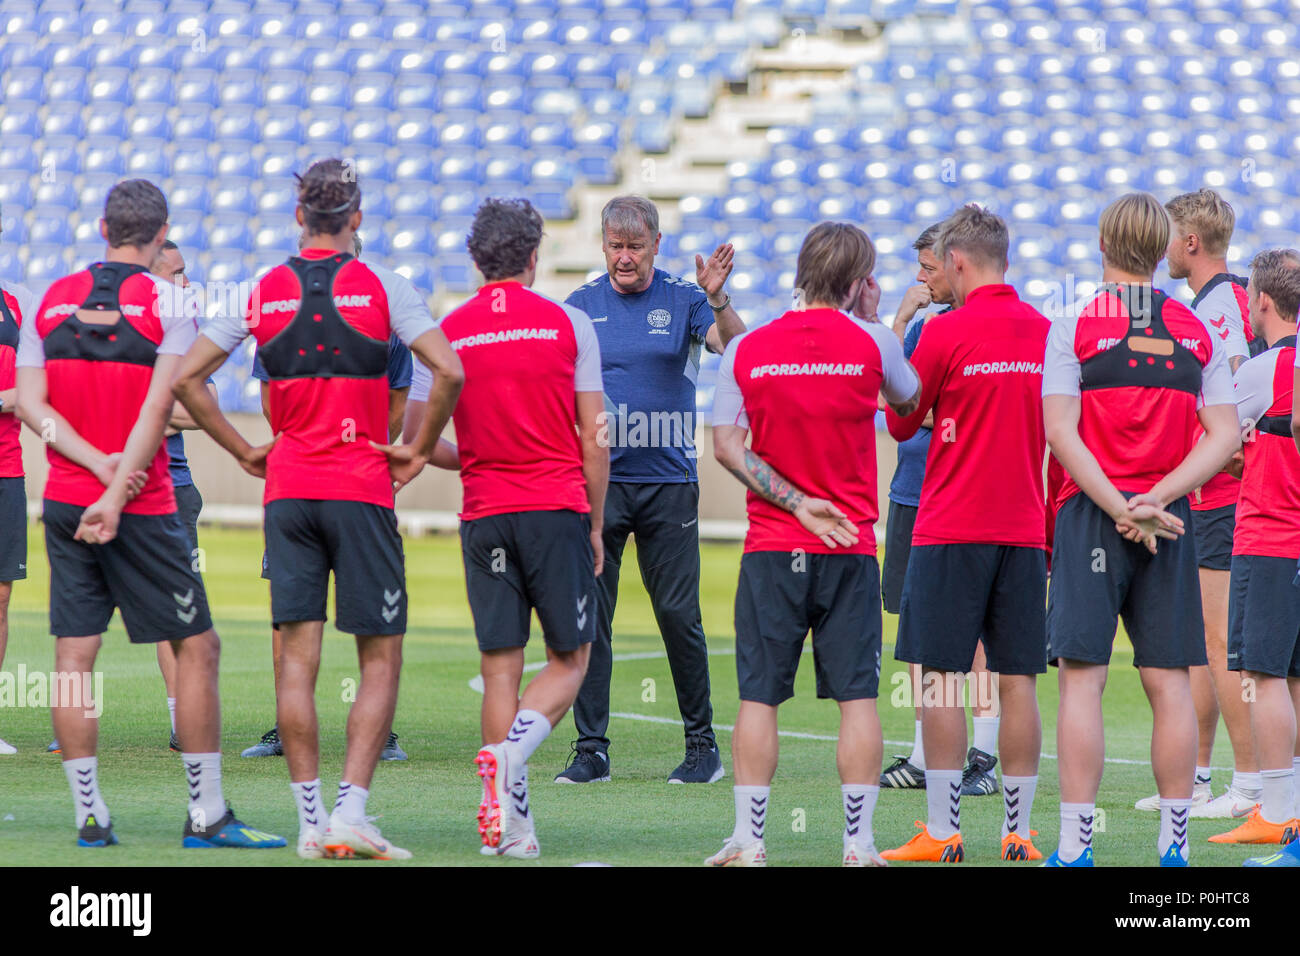 Brondby, Denmark - June 8, 2018. The players of the Danish national football team seen during training before the test match against Mexico at Brøndby Stadium. (Photo credit: Gonzales Photo - Thomas Rasmussen). Stock Photo